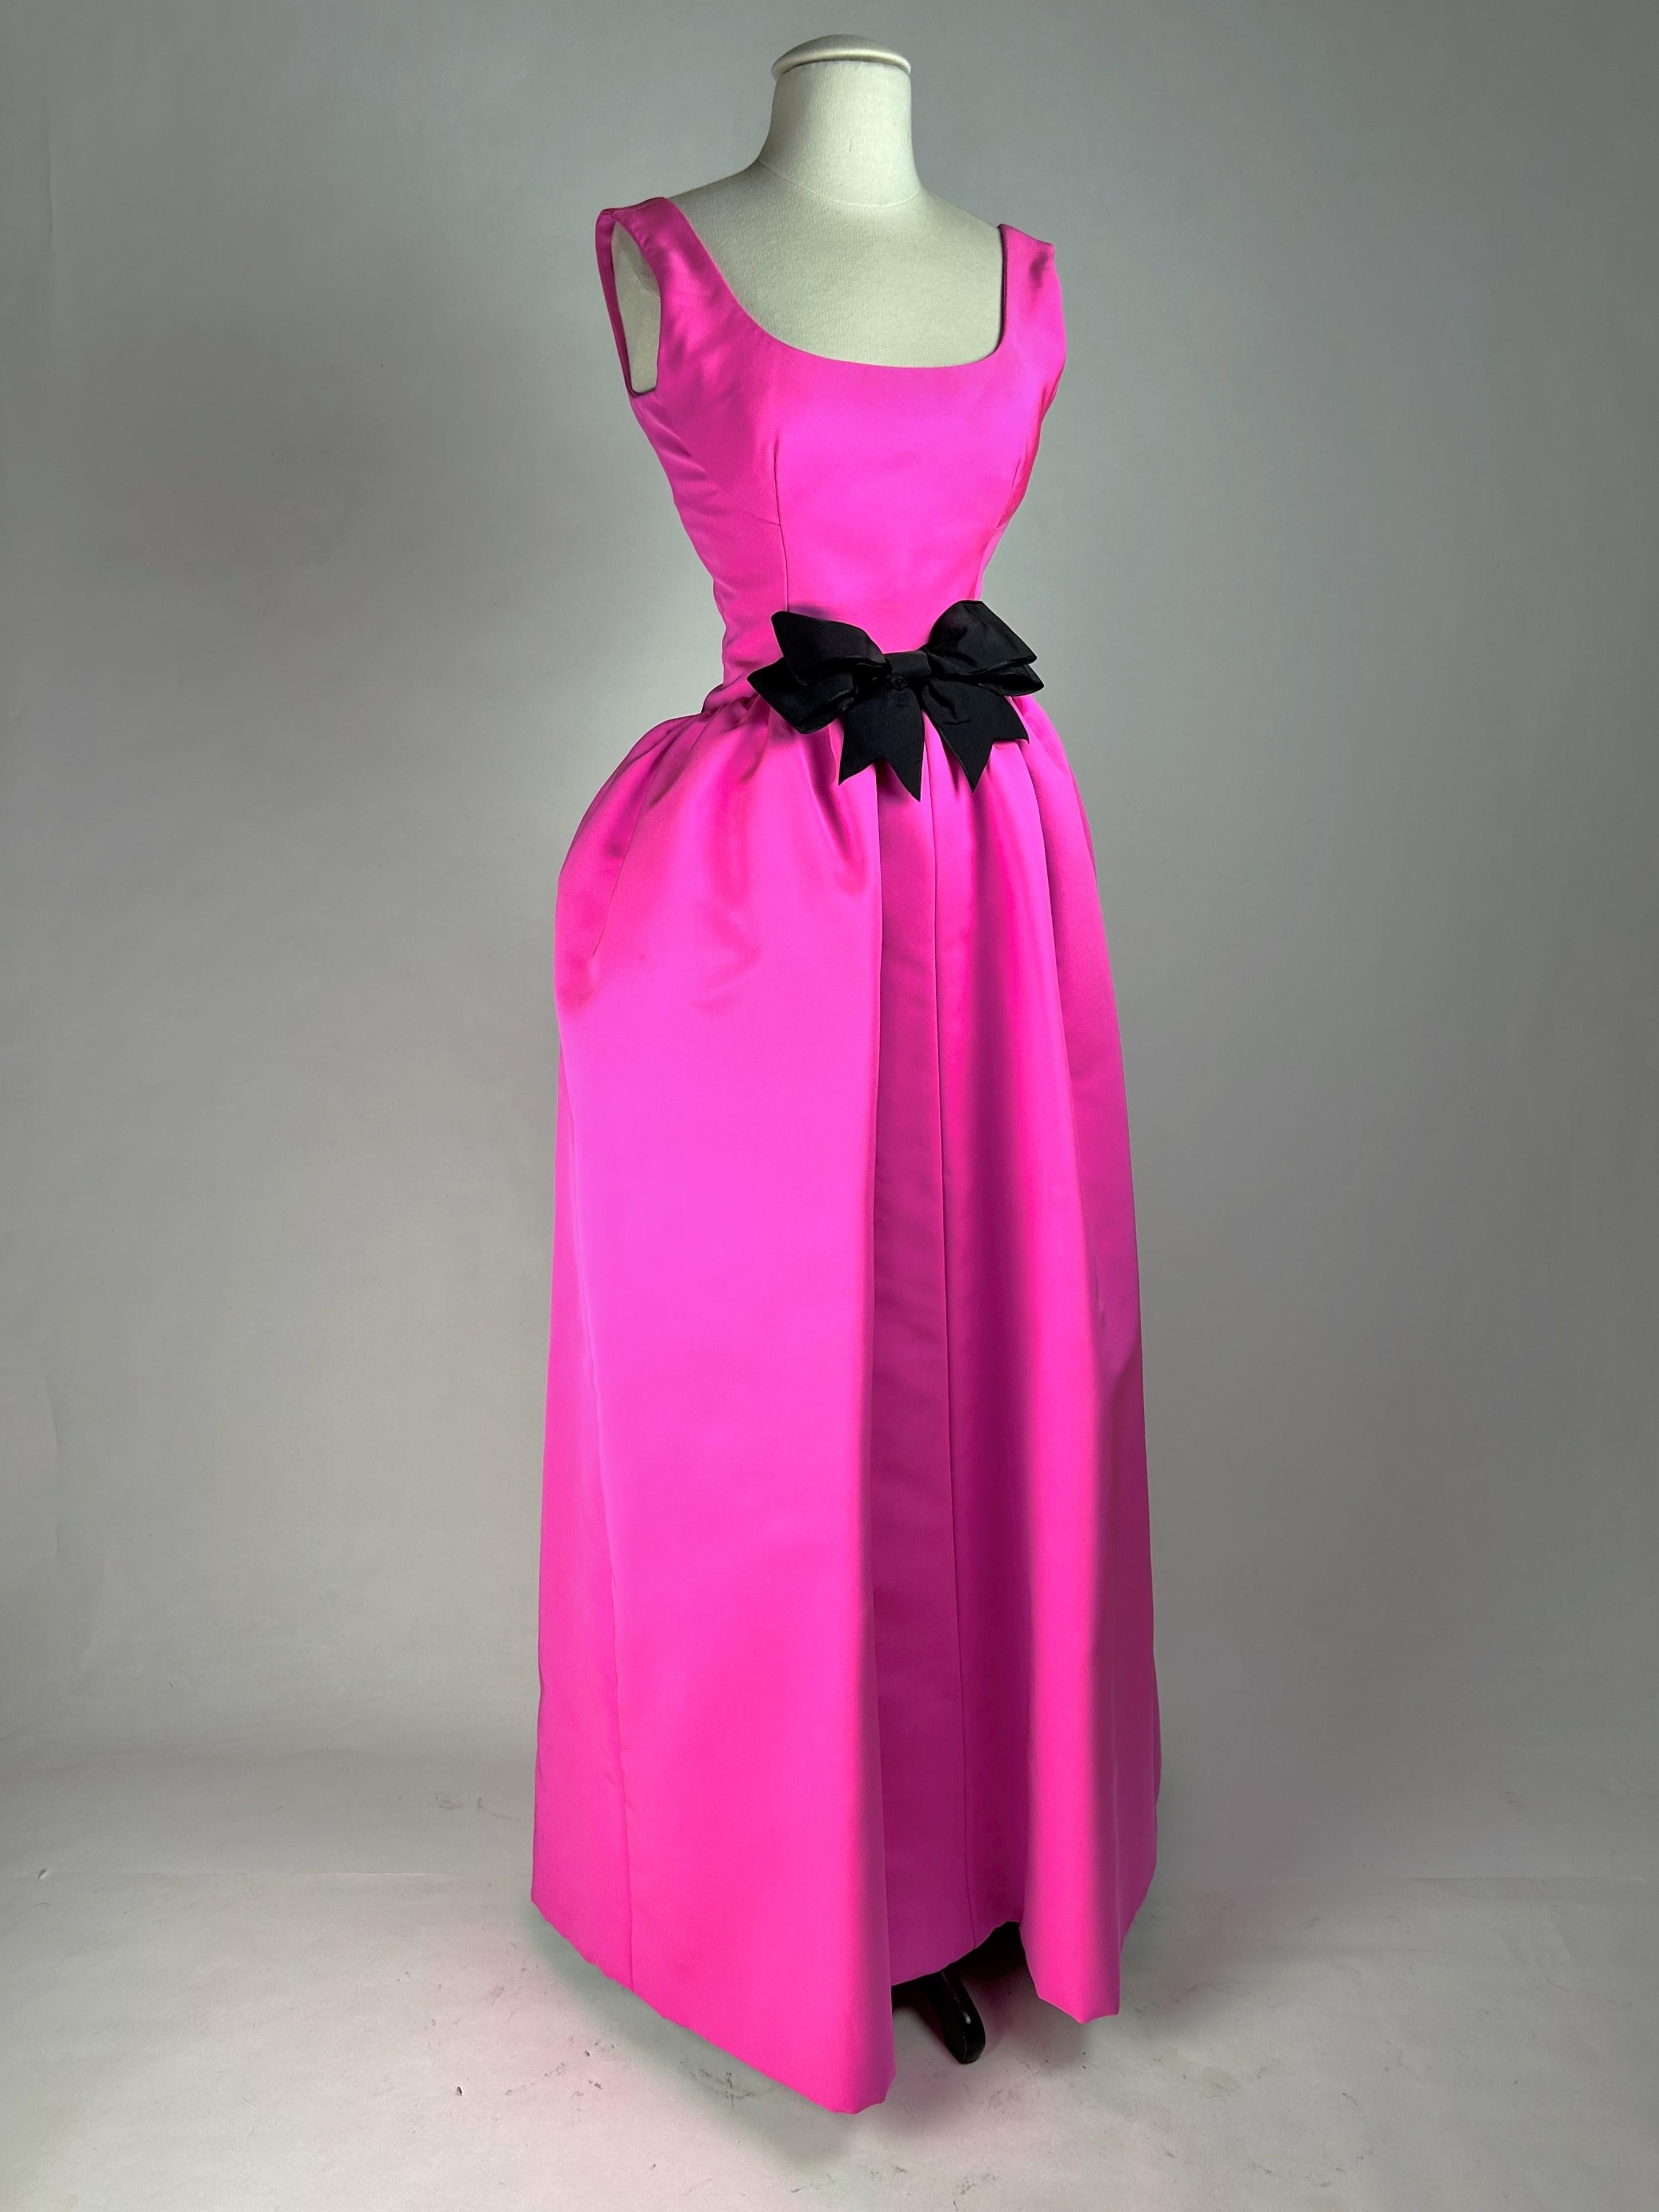 Circa 1962-1965

Paris

Evening dress by Cristobal Balenciaga, Haute Couture (attributed to) in Gazar Magenta dating from the early 1960s. Long dress with curved bustier, sleeveless and oval neckline. Tipped waistline highlighted by a large black